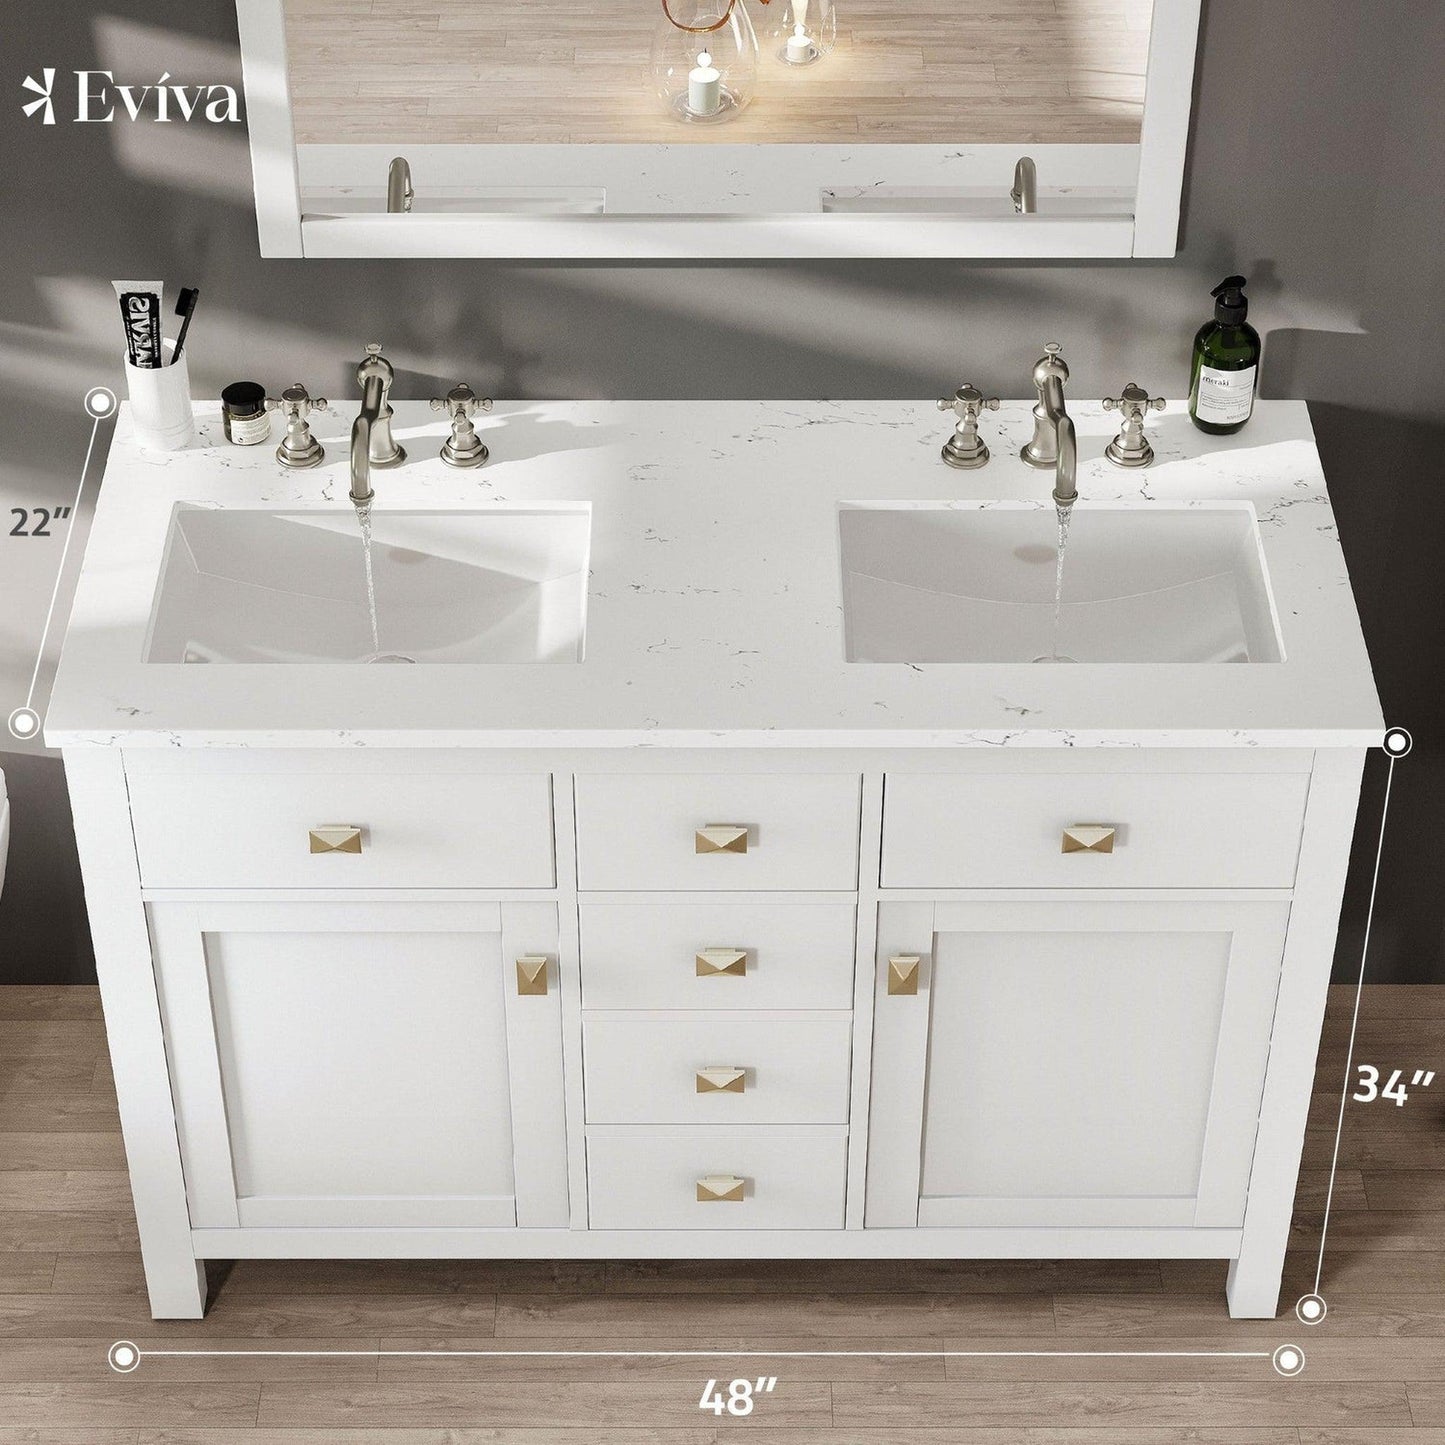 Eviva Totti Artemis 48" x 34" White Freestanding Bathroom Vanity With Carrara Style Man-made Stone Countertop and Double Undermount Sink